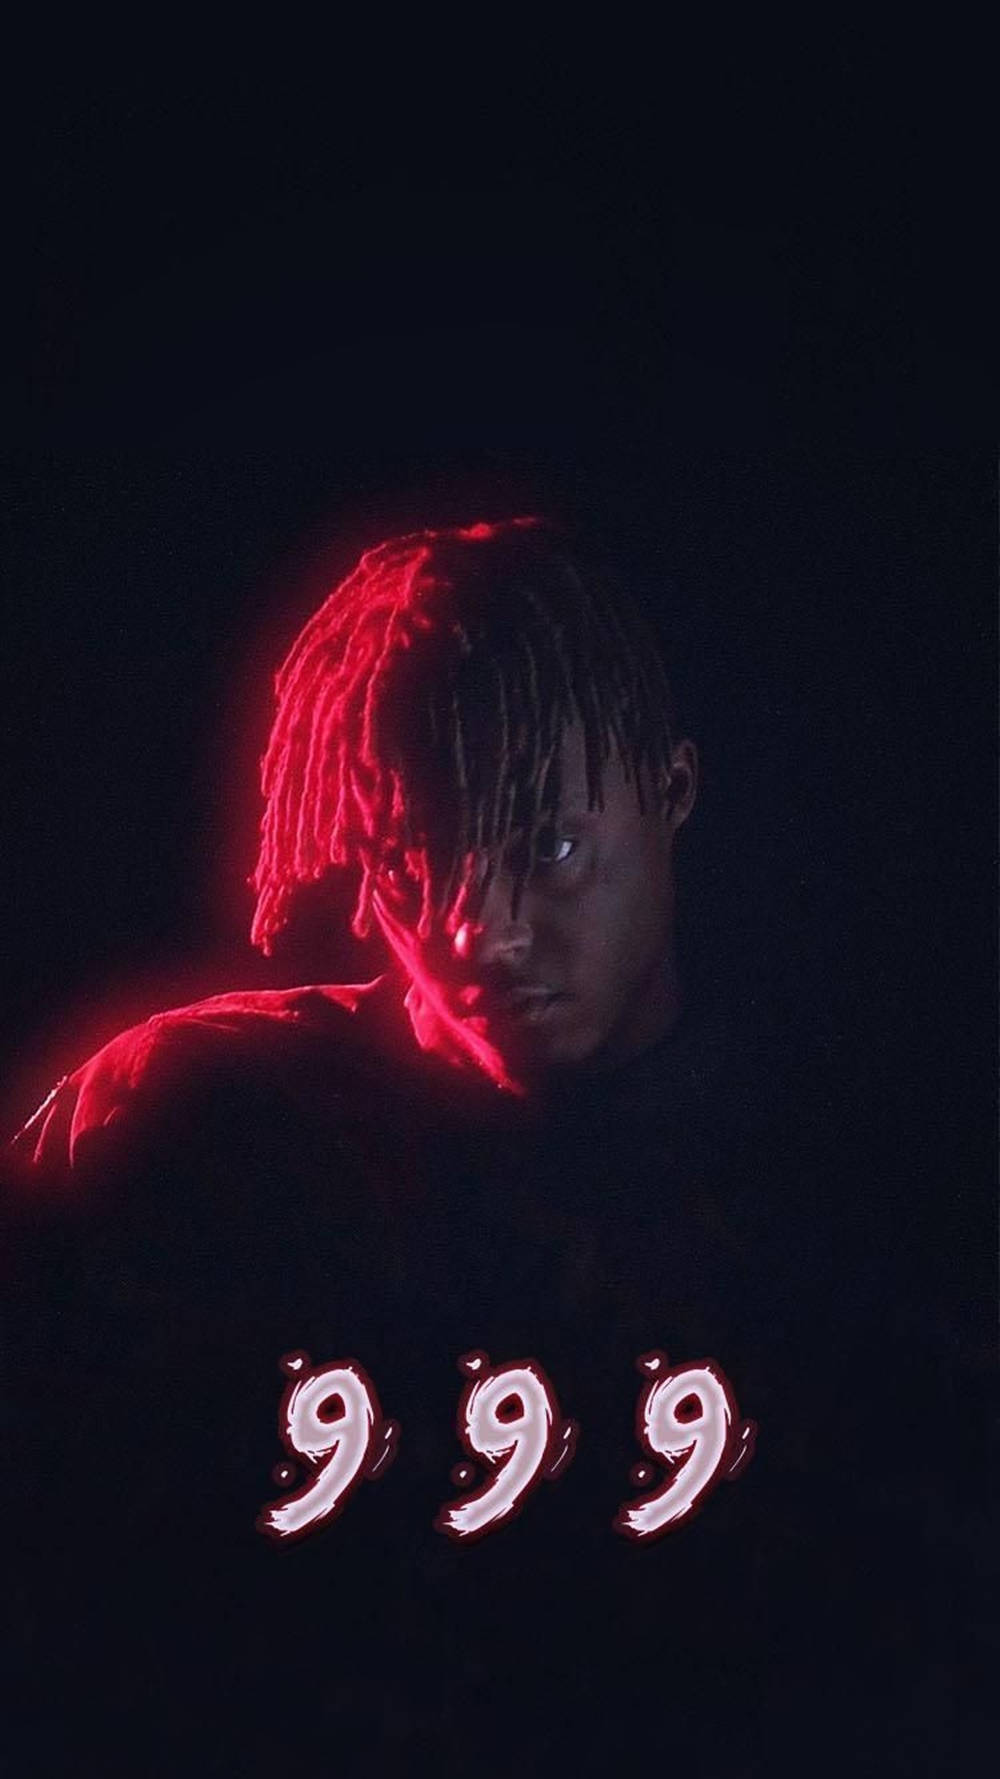 Juice Wrld's Cool Aesthetic Keeps Fans Connected